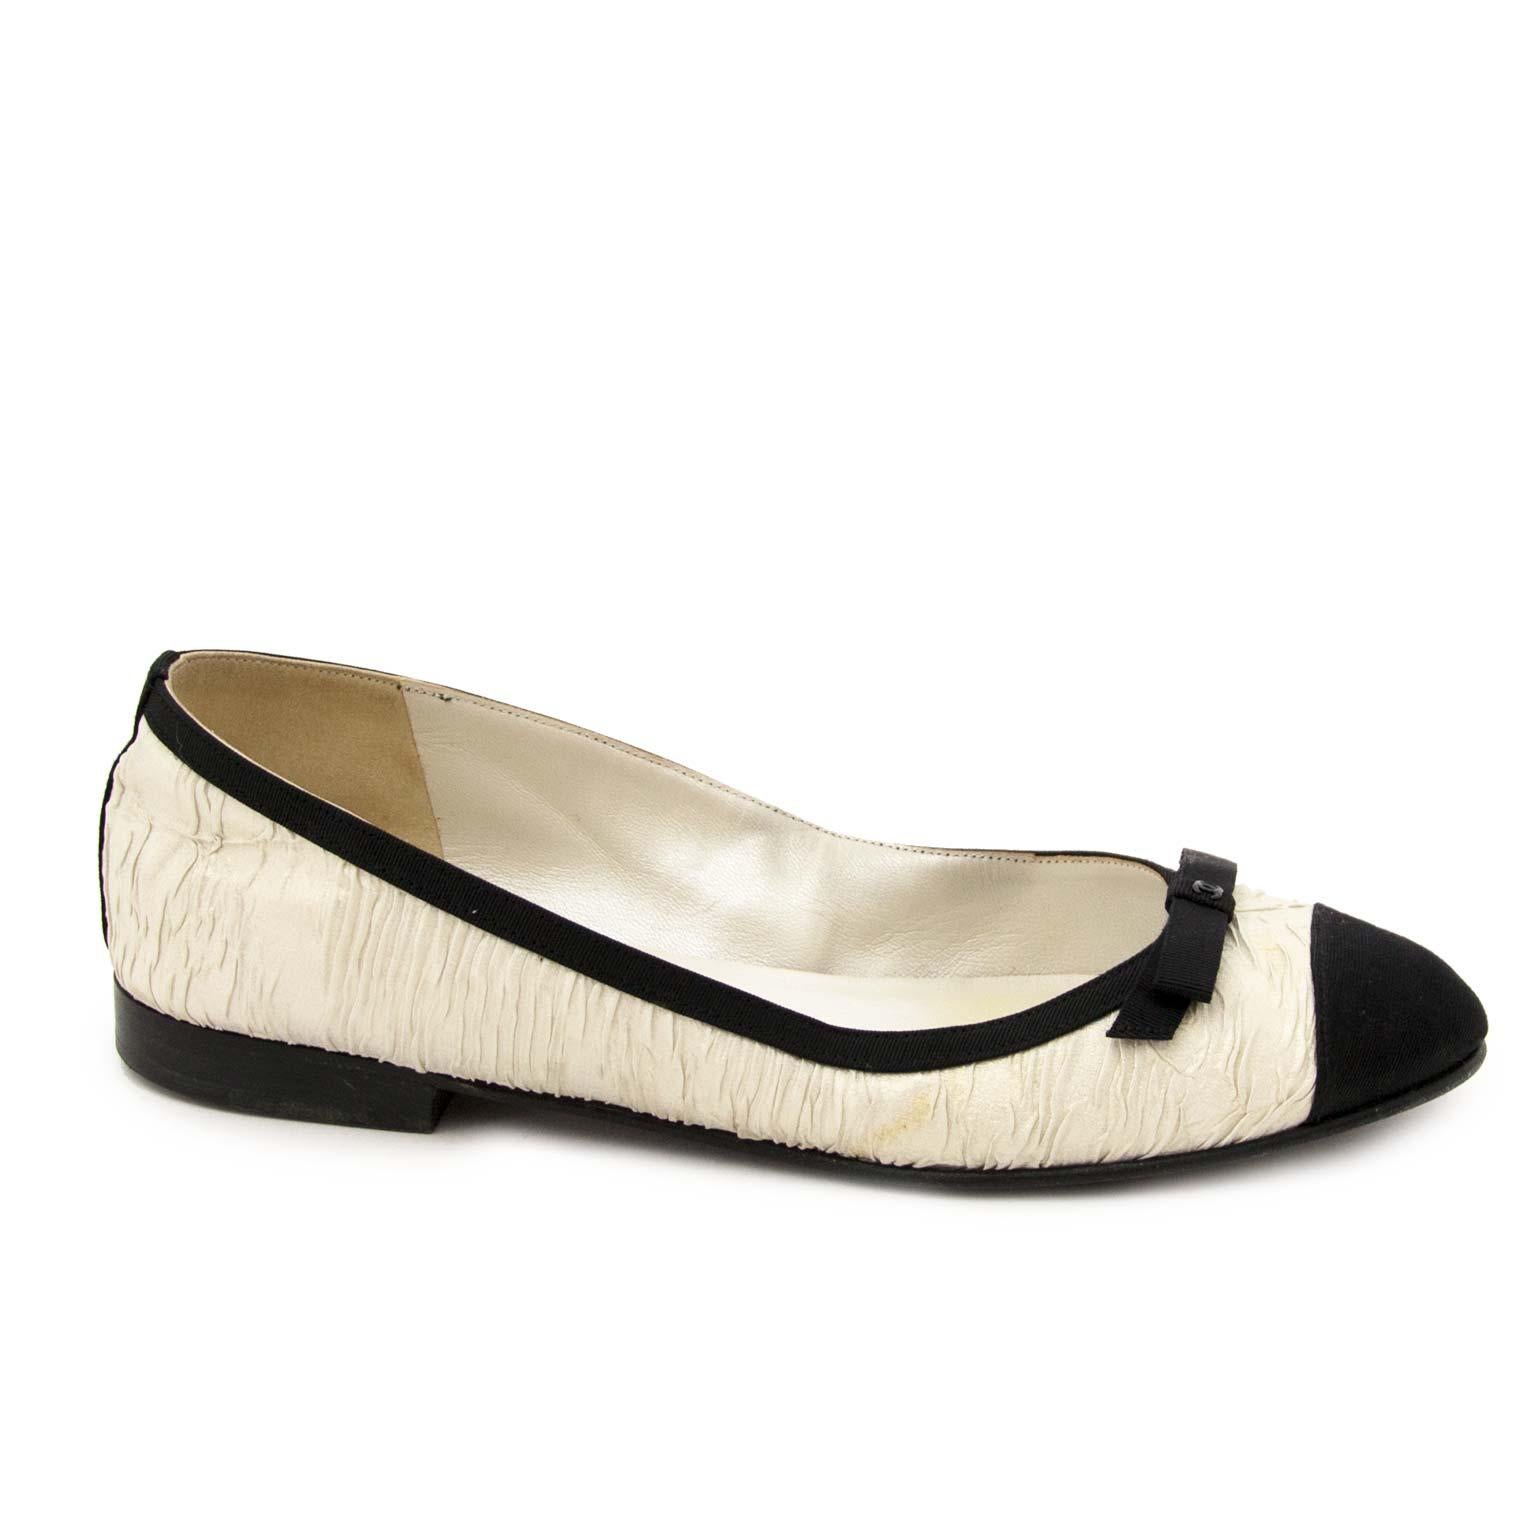 black and white ballet flats